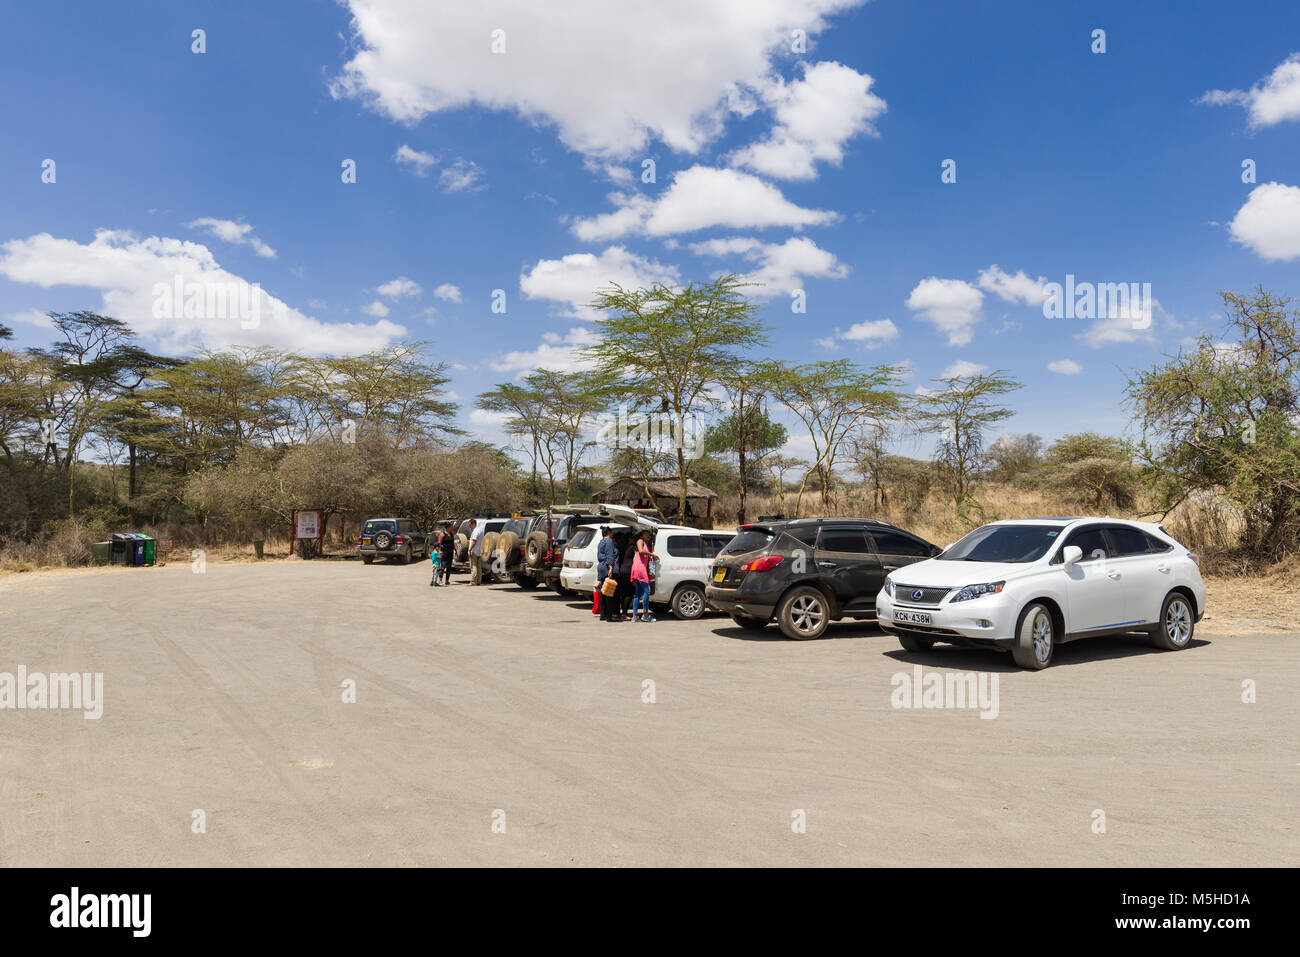 Vehicles parked at the Hippo pools car park in Nairobi National Park with people standing by the cars, Kenya Stock Photo